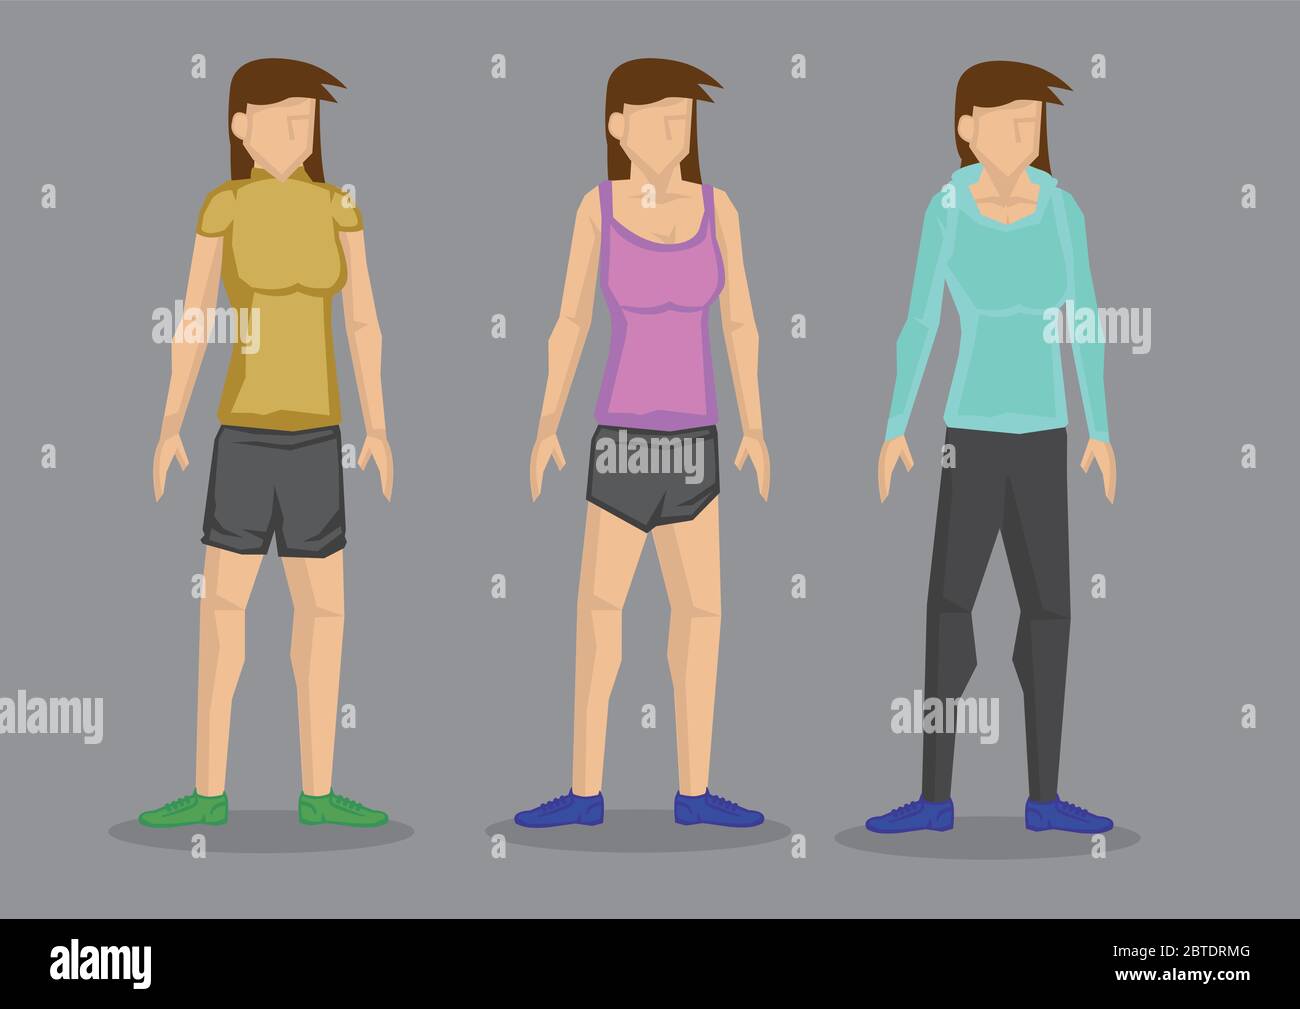 Set of three vector illustrations of cartoon women in different fashion outfits for sporty look isolated on grey background. Stock Vector